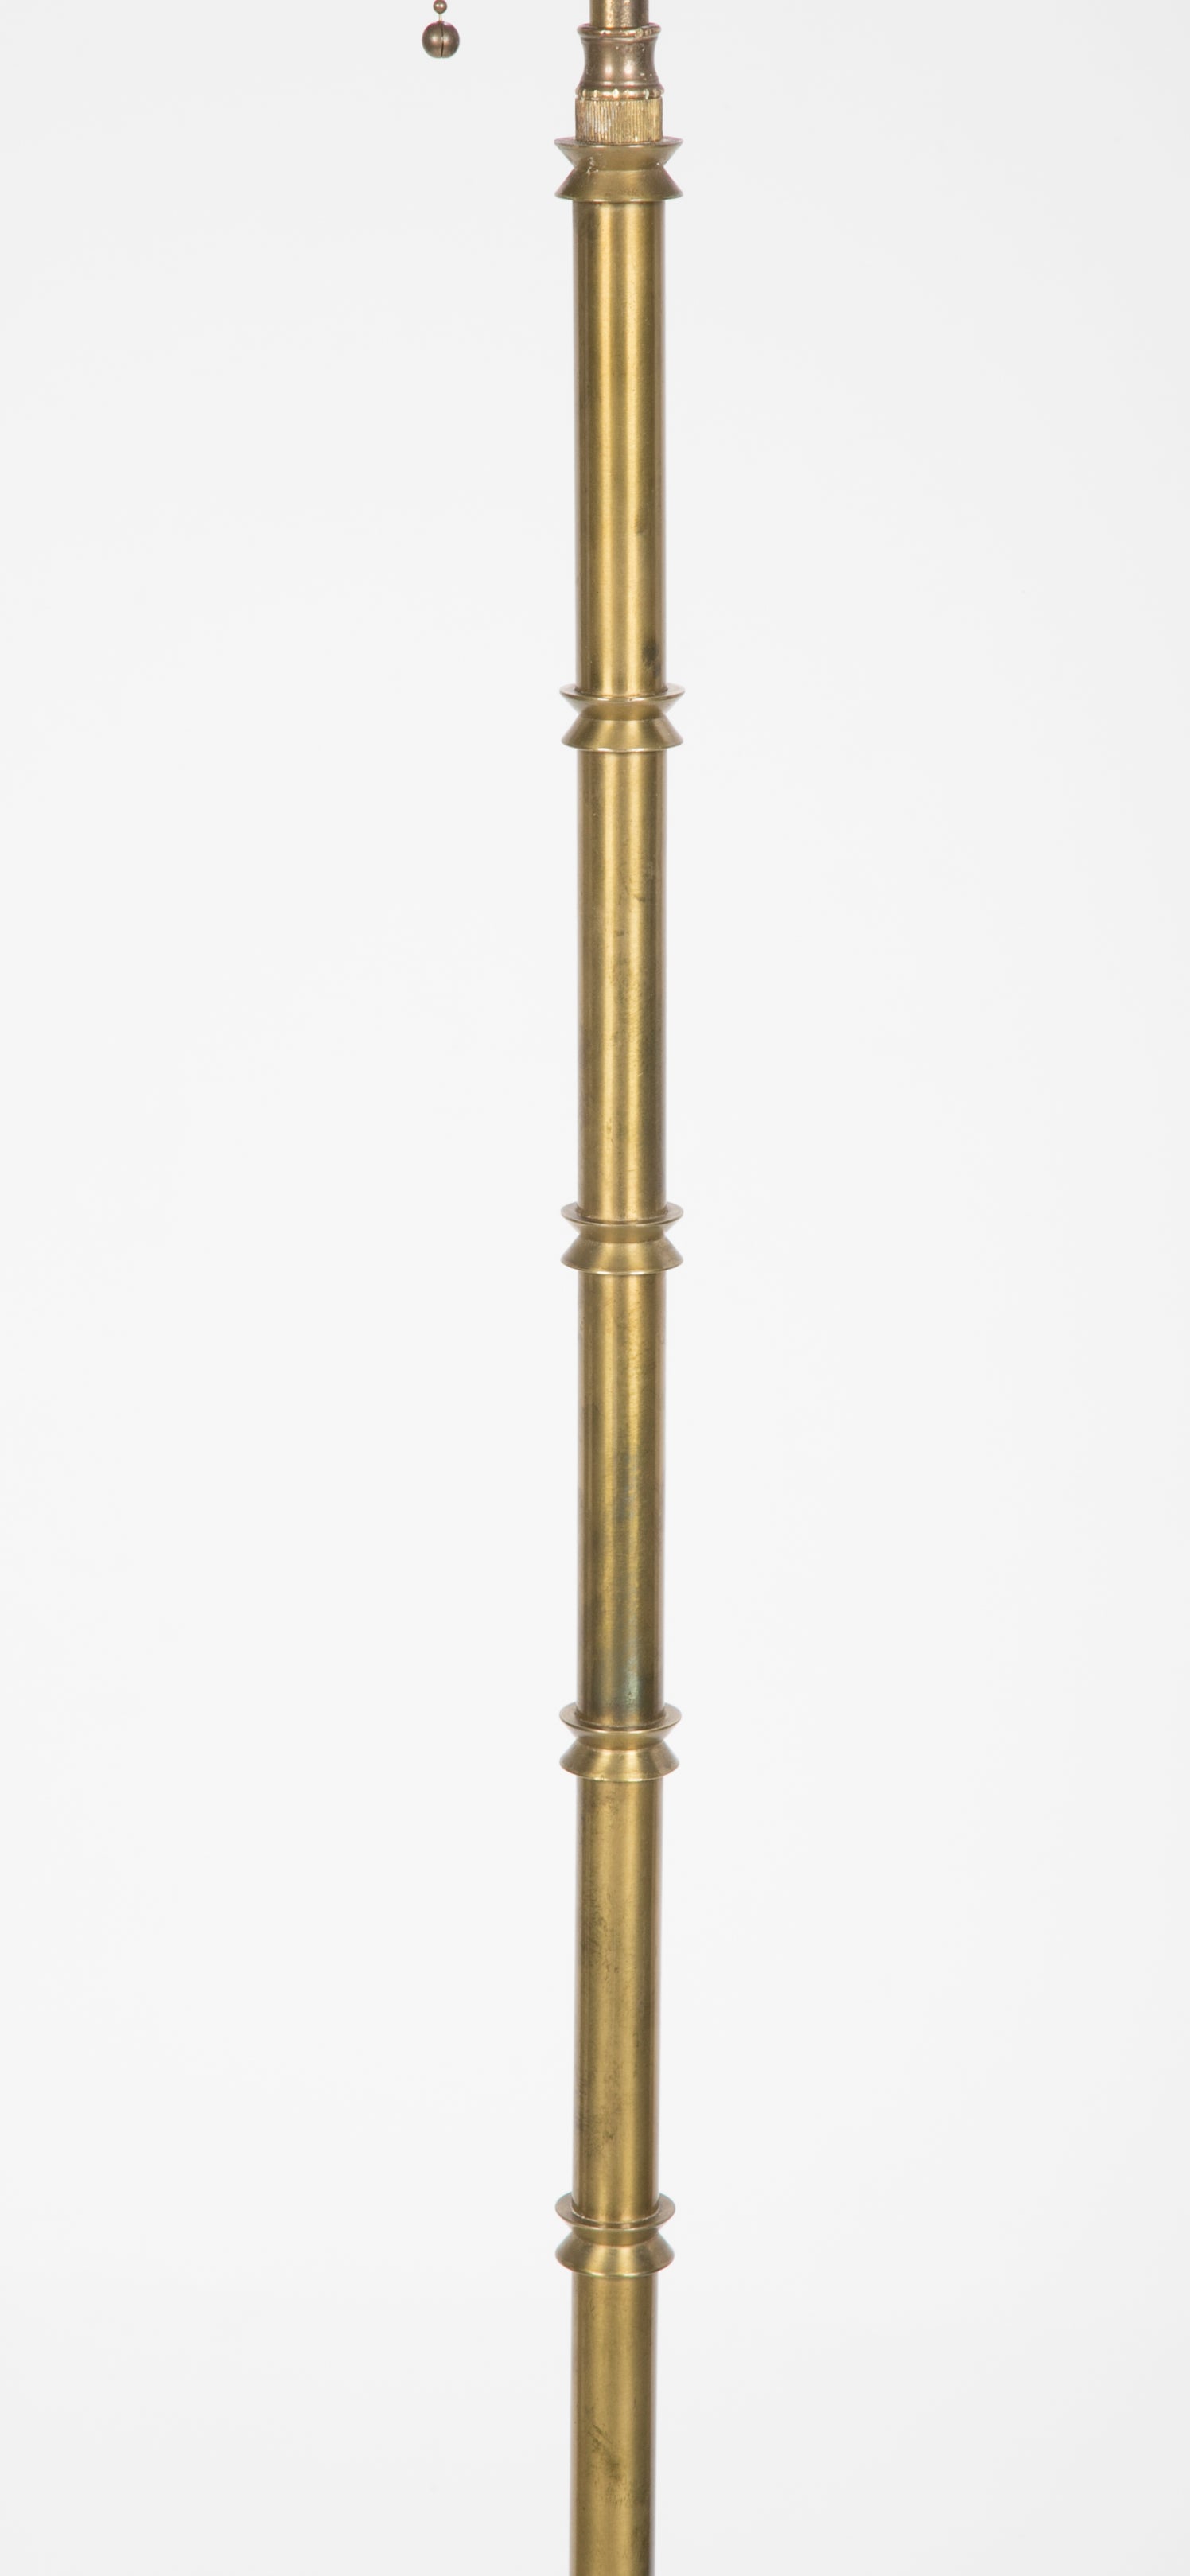 A Machined Bronze Faux Bamboo Inspired Floor lamp